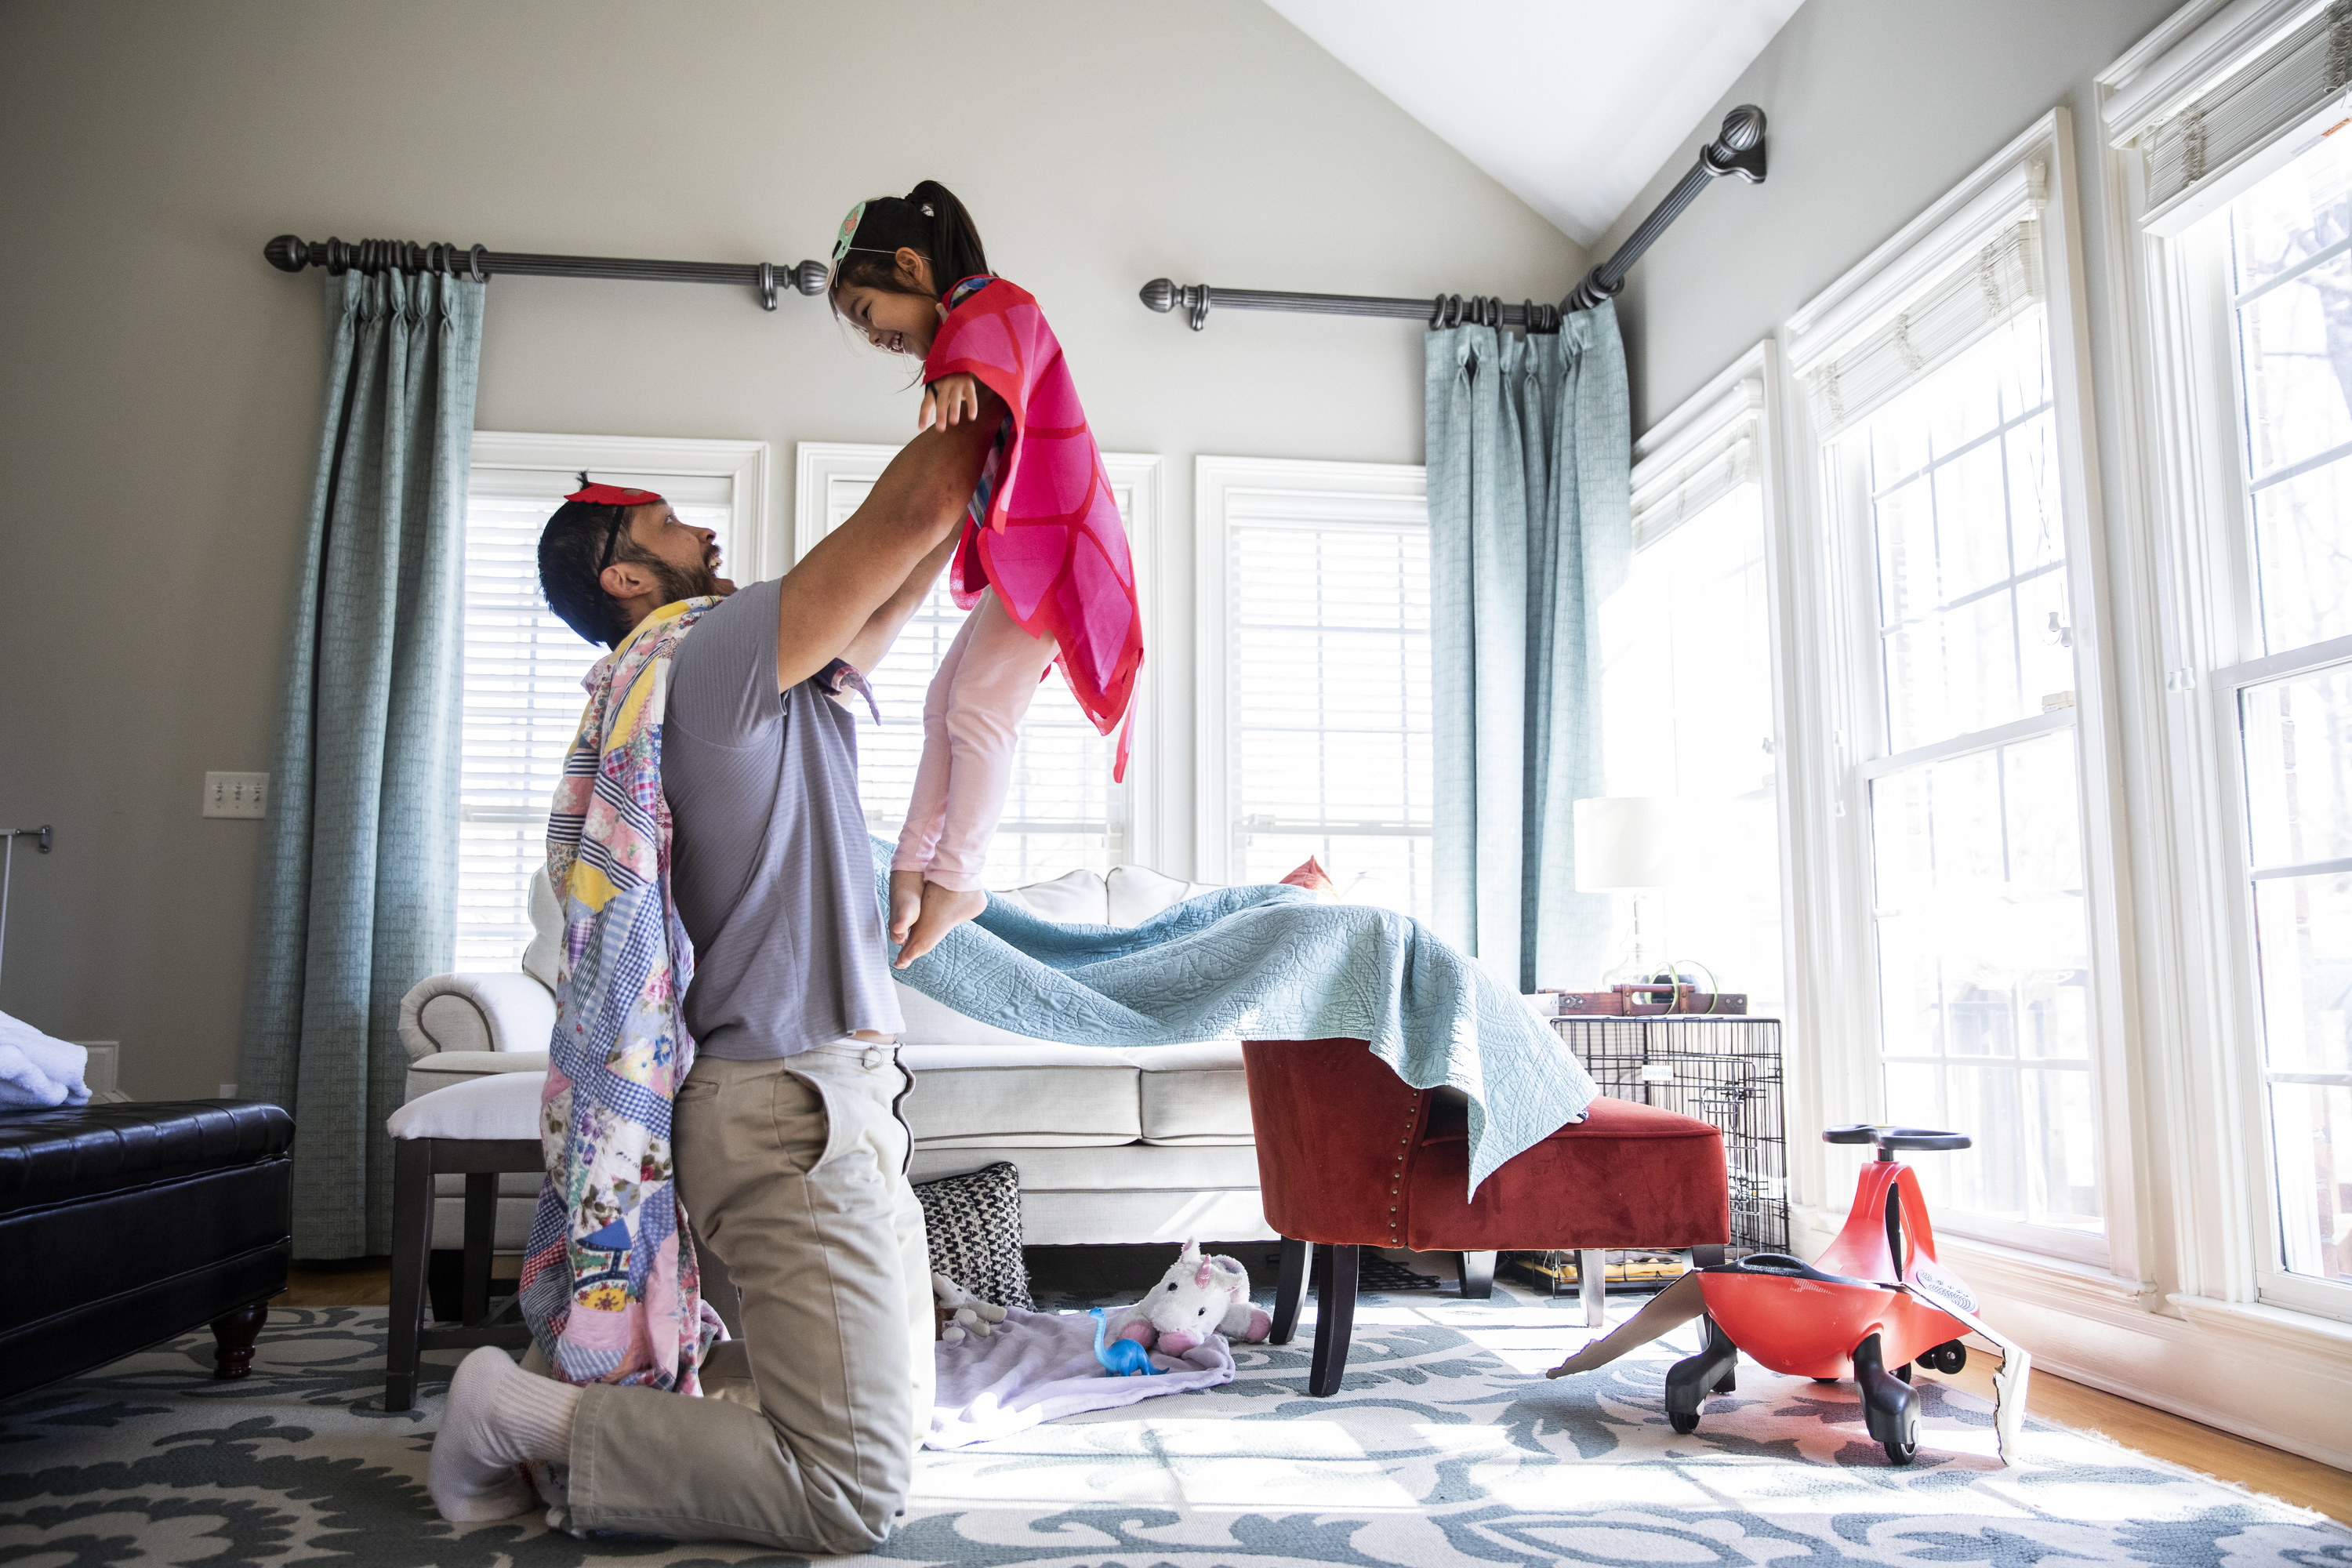 A dad and his daughter play as superheroes in their home